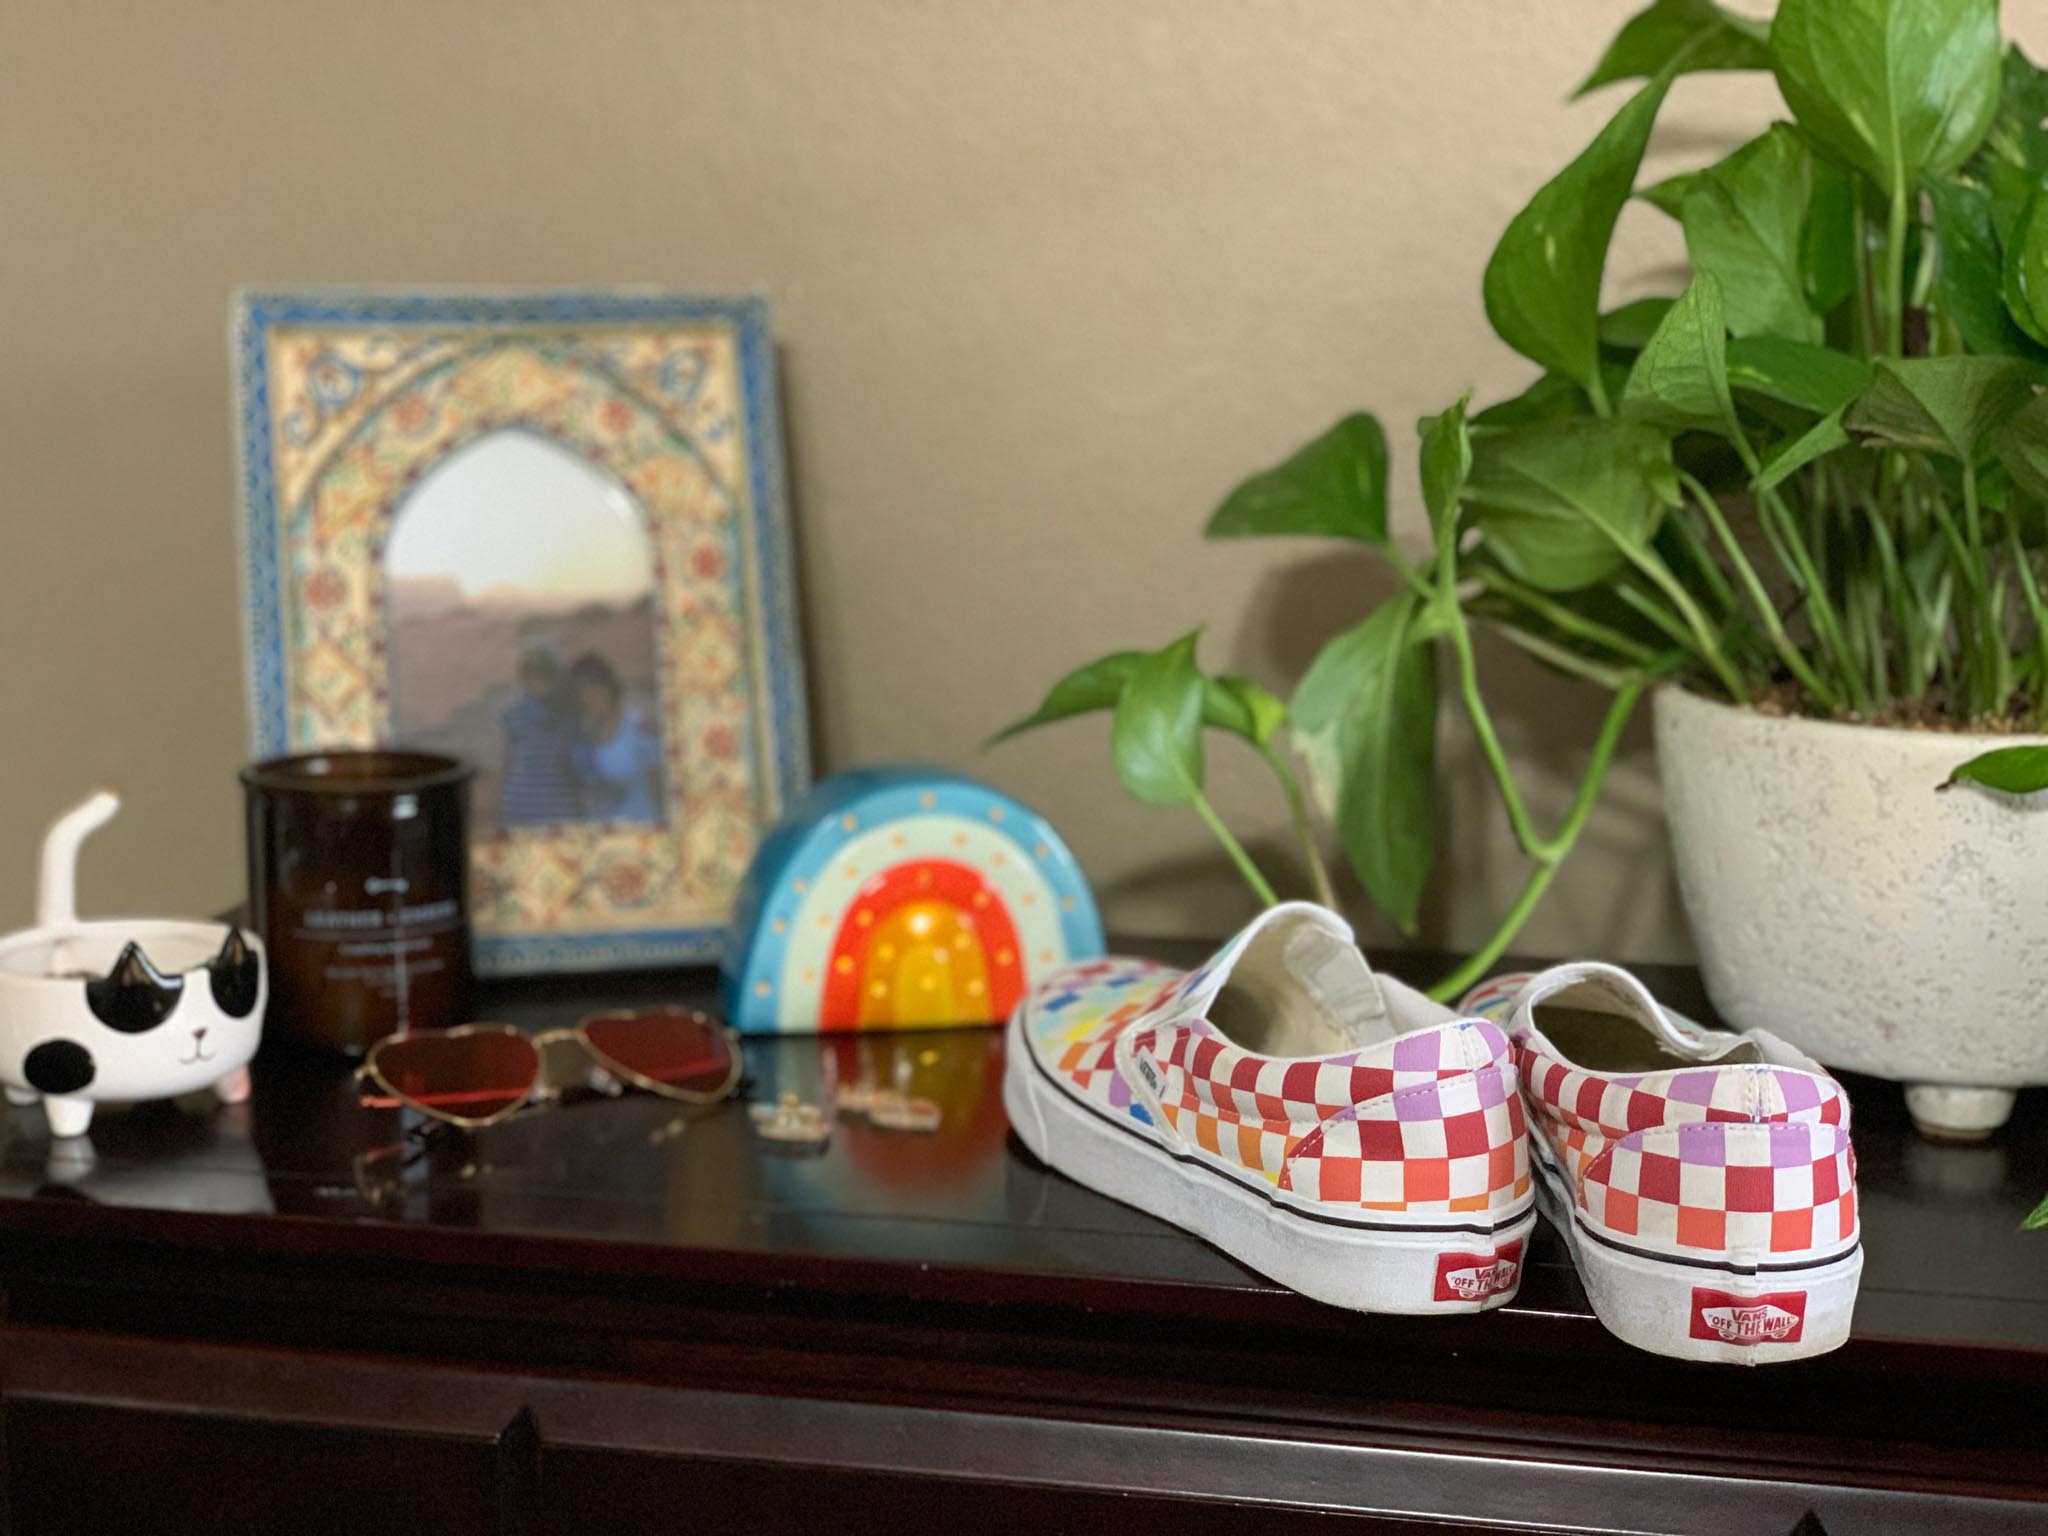 Buffalo Exchange - Things I Think About When I Sell My Clothing - Photo of Rainbow Vans on Dresser Top with Plant, Photo Frame, Candle, Earrings, and Rainbow Figurine